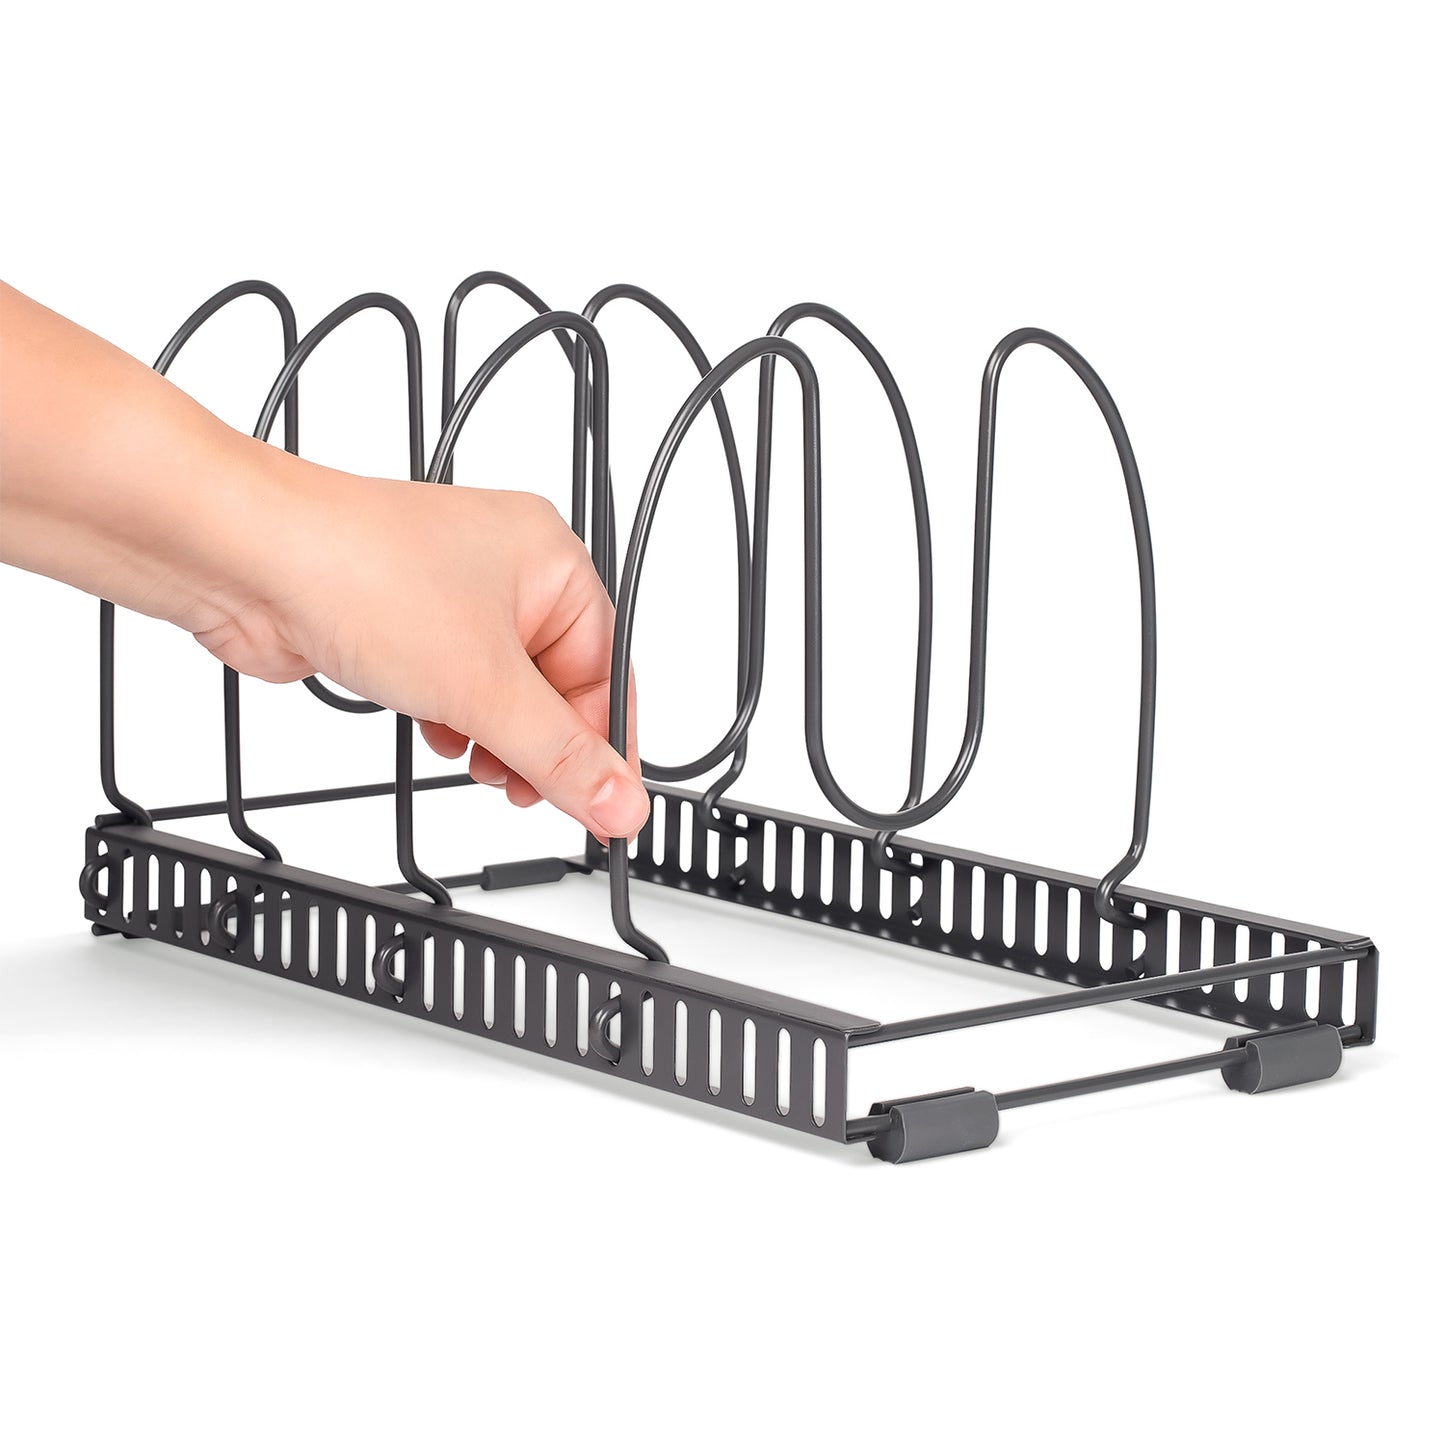 7.5"W Anti-Scratch 12+ Adjustable Compartments Expandable Pot and Pan Organizer Rack